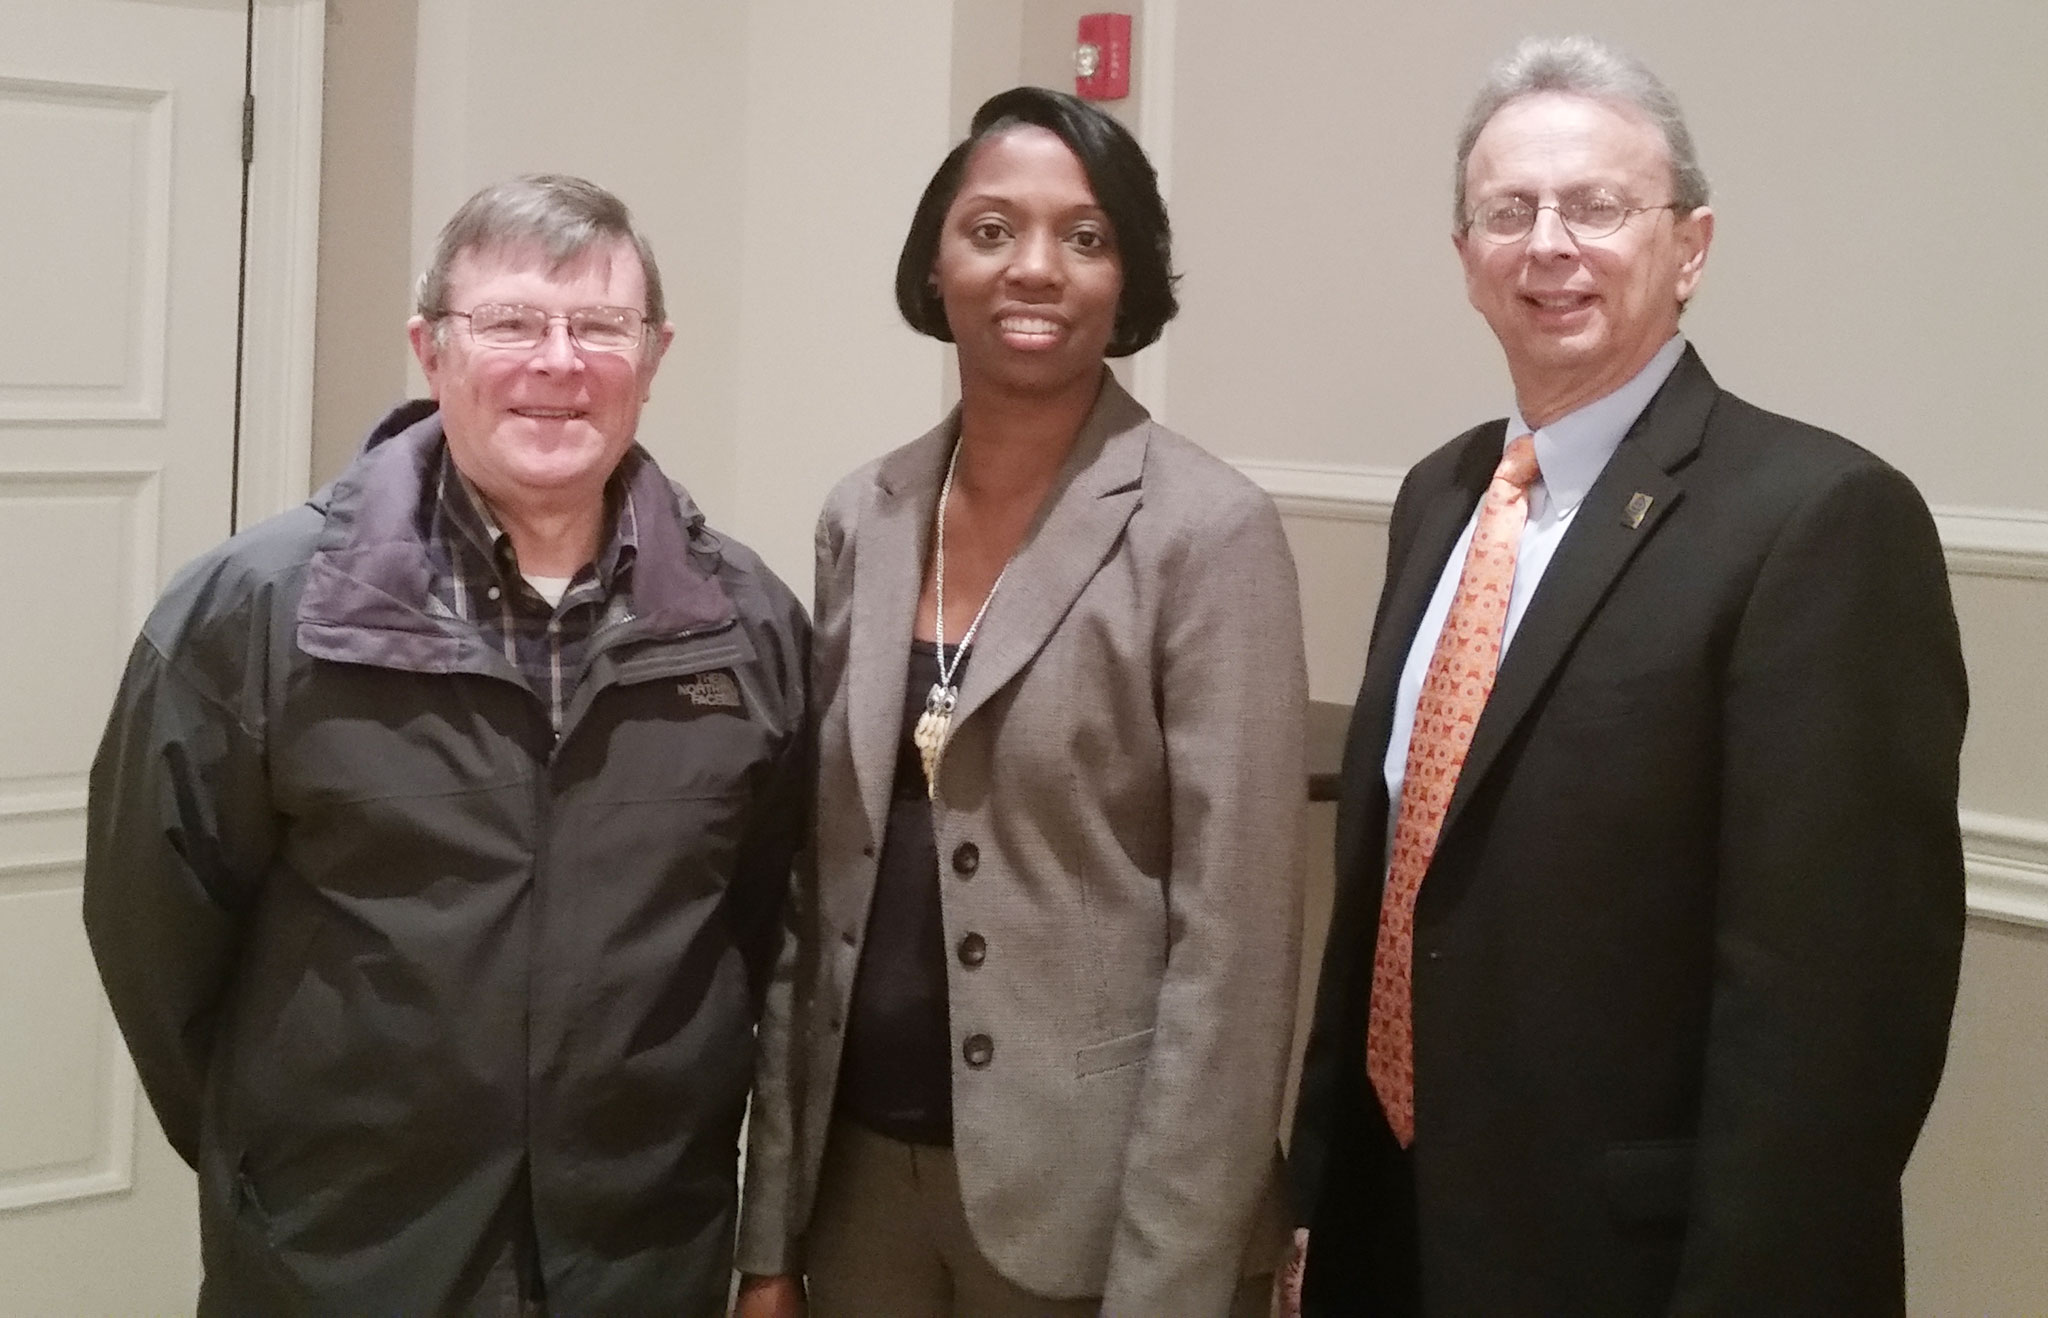 At the May 19 meeting of the Cumberland County School Boards Association (CCSBA), left to right, Mike Beatty, Millville board member and vice president, CCSBA; Michelle Kennedy, Fairfield board member and president, CCSBA; and Dr. Lawrence S. Feinsod, NJSBA executive director. 